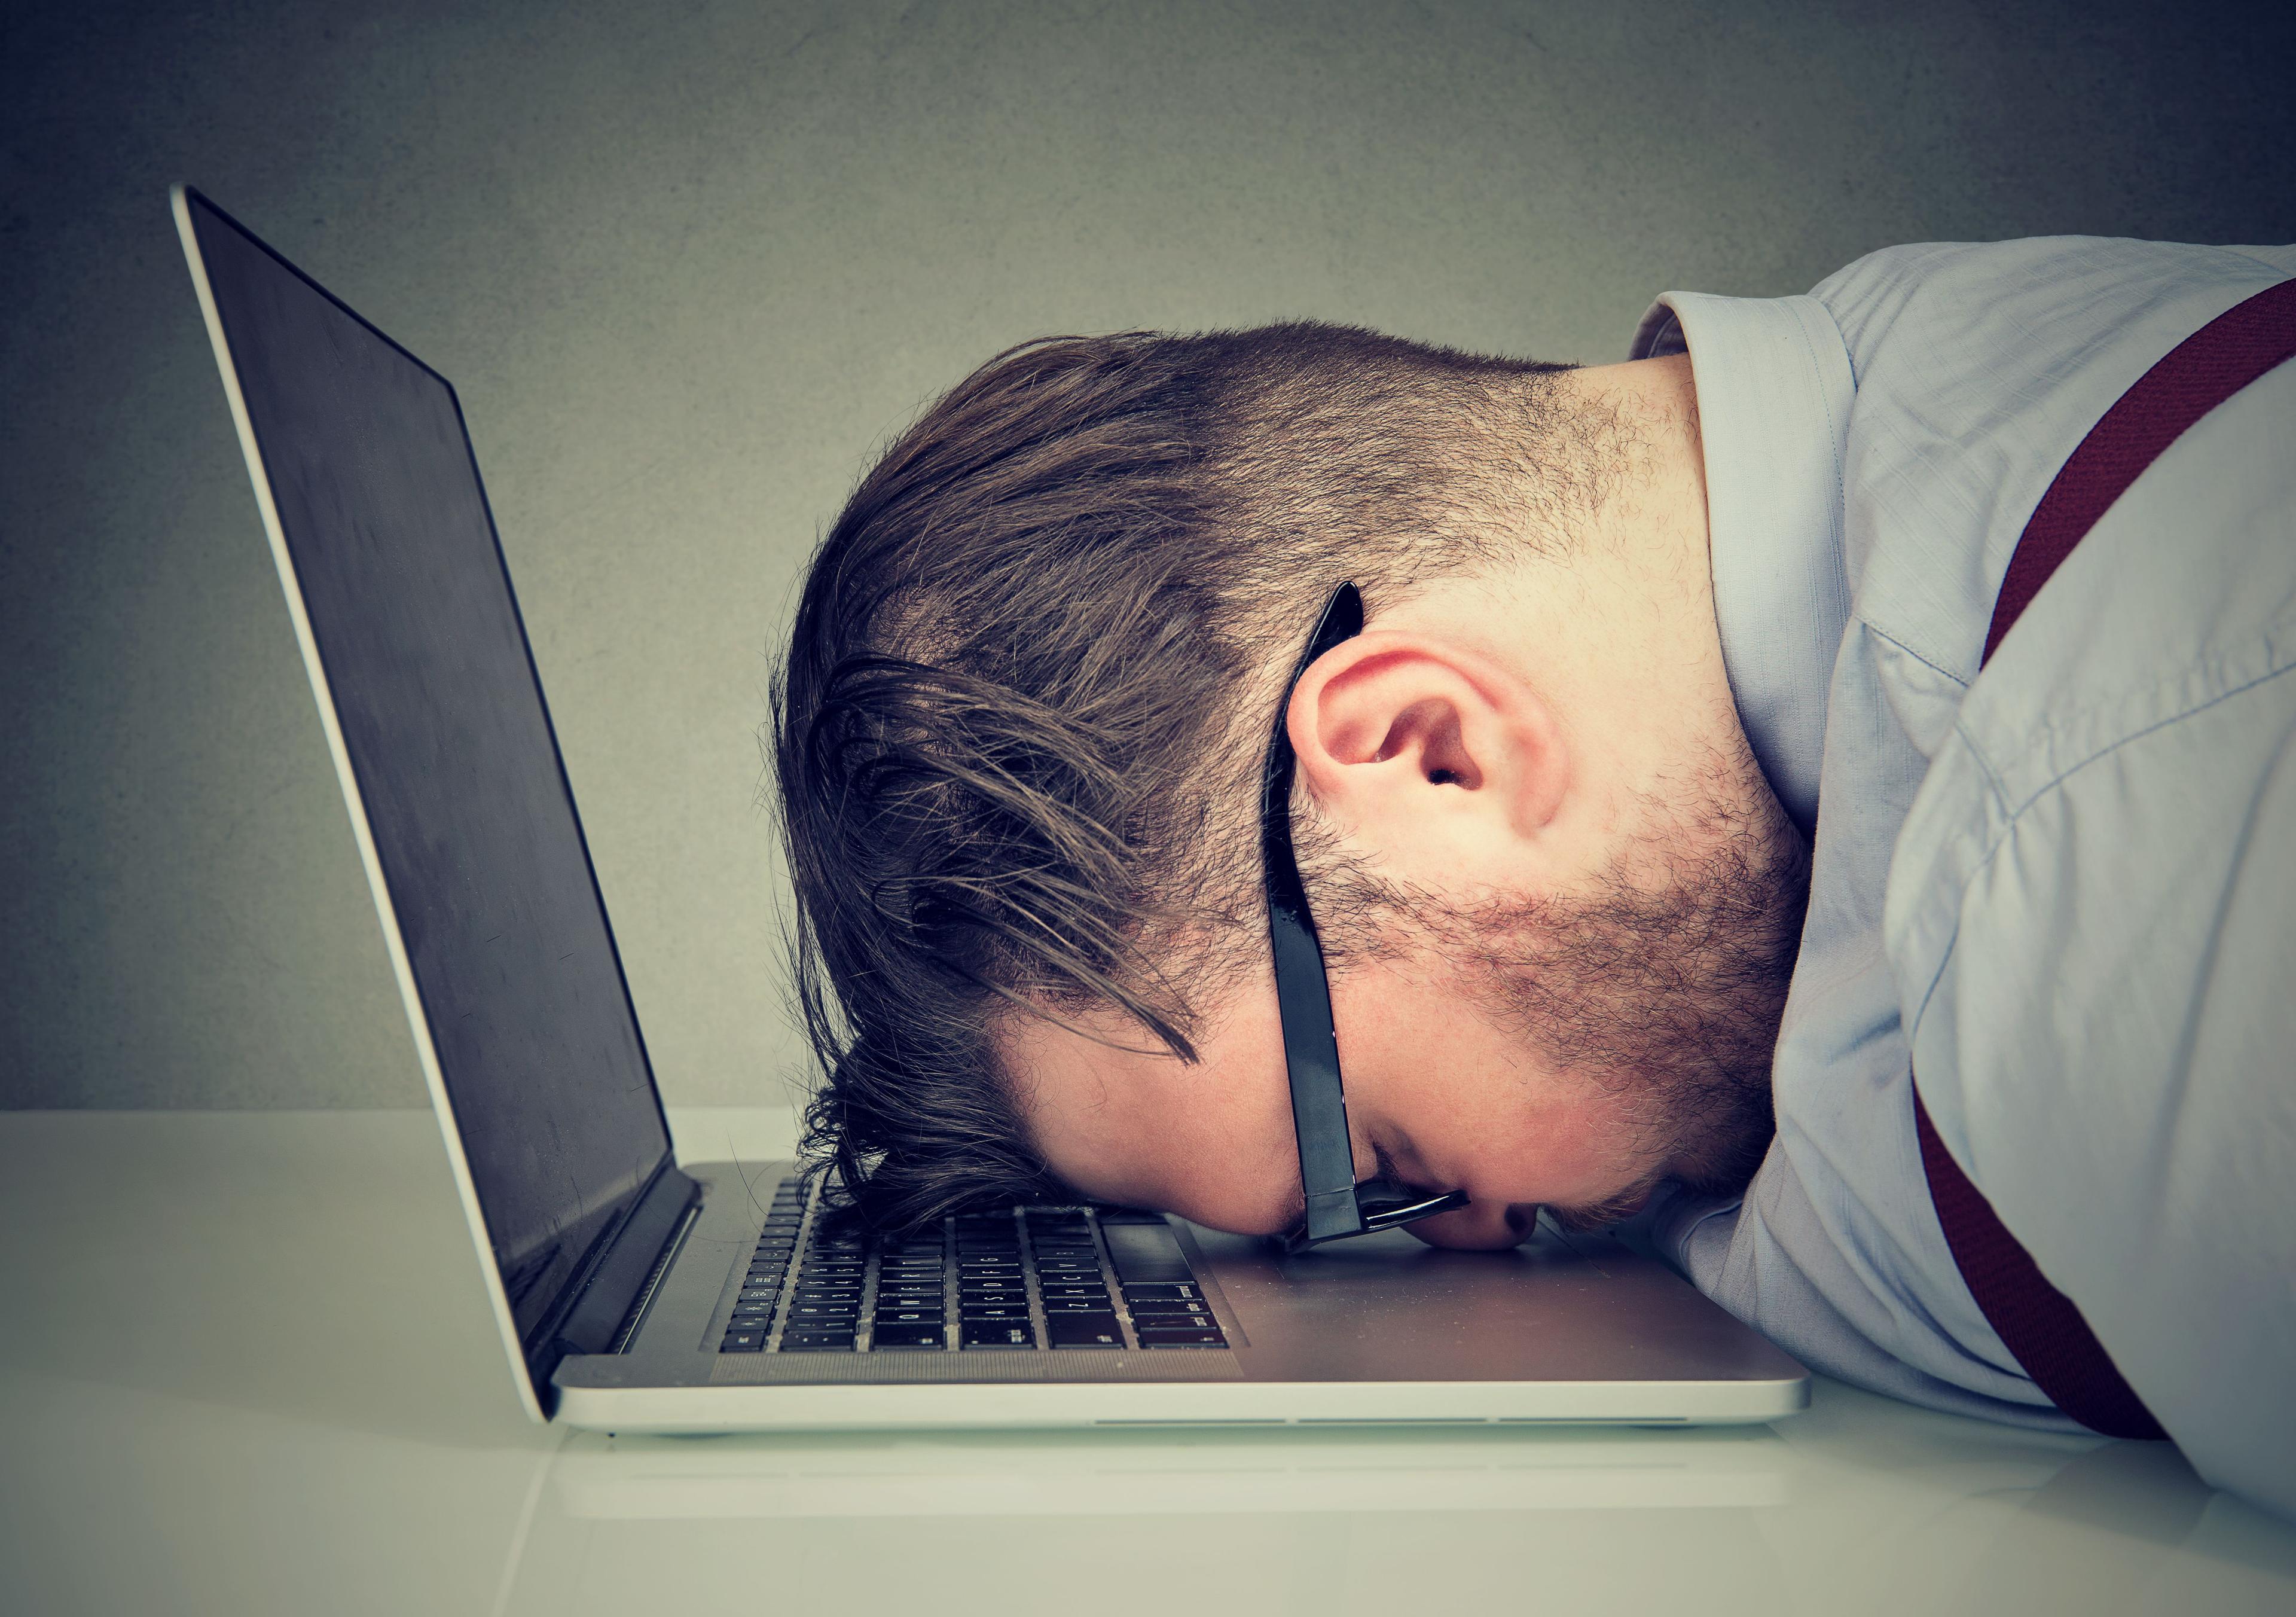 A man puts his head on a laptop keyboard as if giving up